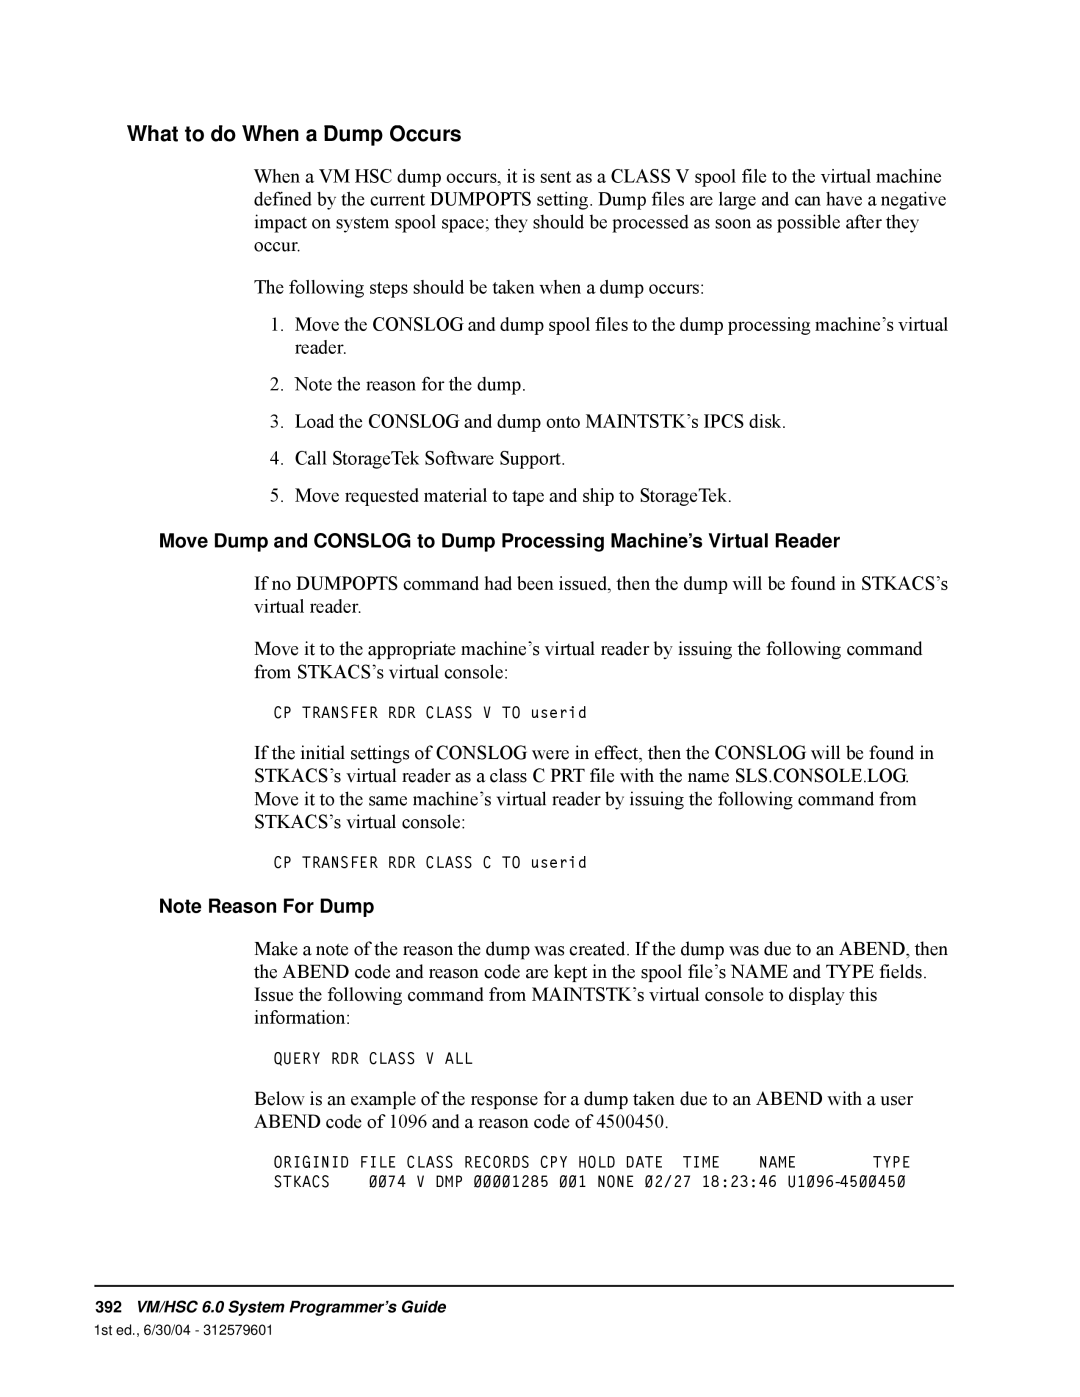 StorageTek 6 manual What to do When a Dump Occurs, Note Reason For Dump 